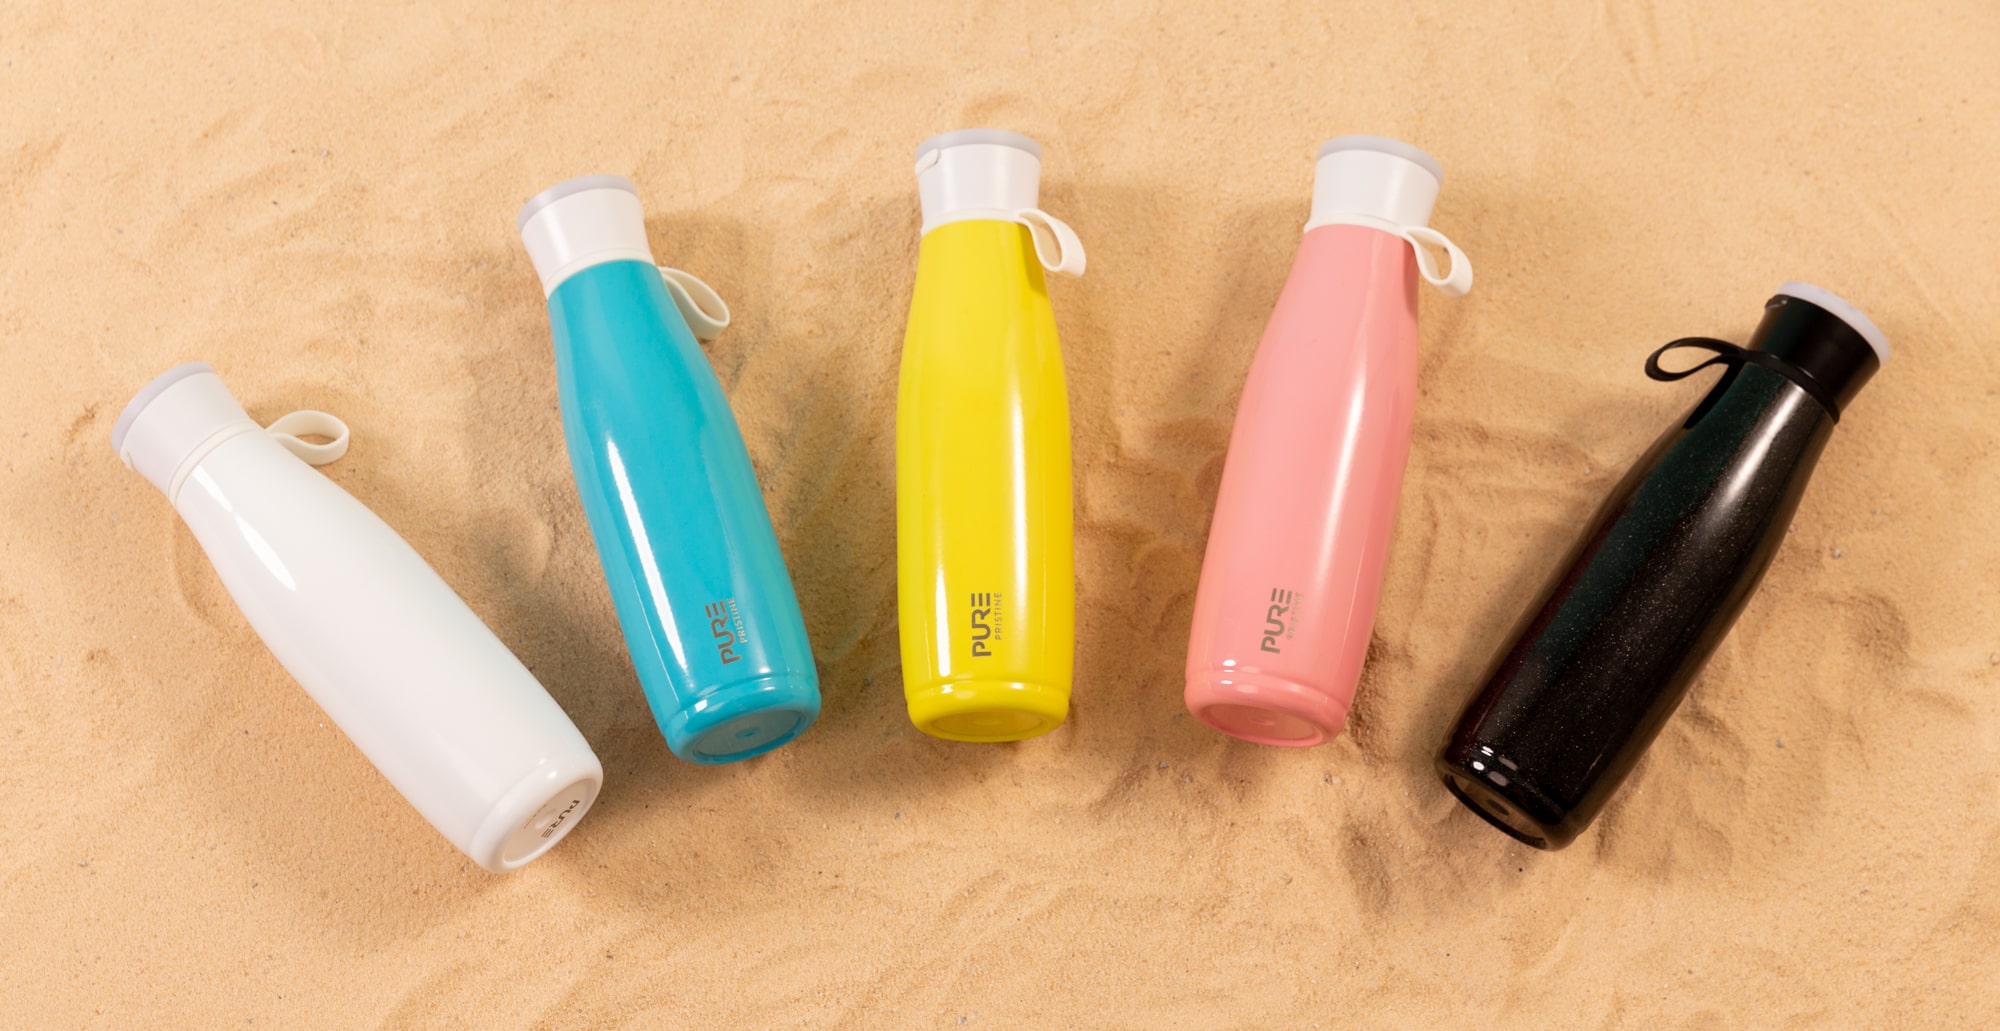 PURE drinkware speaker bottle line up on beach sand by REMEDY brand photography